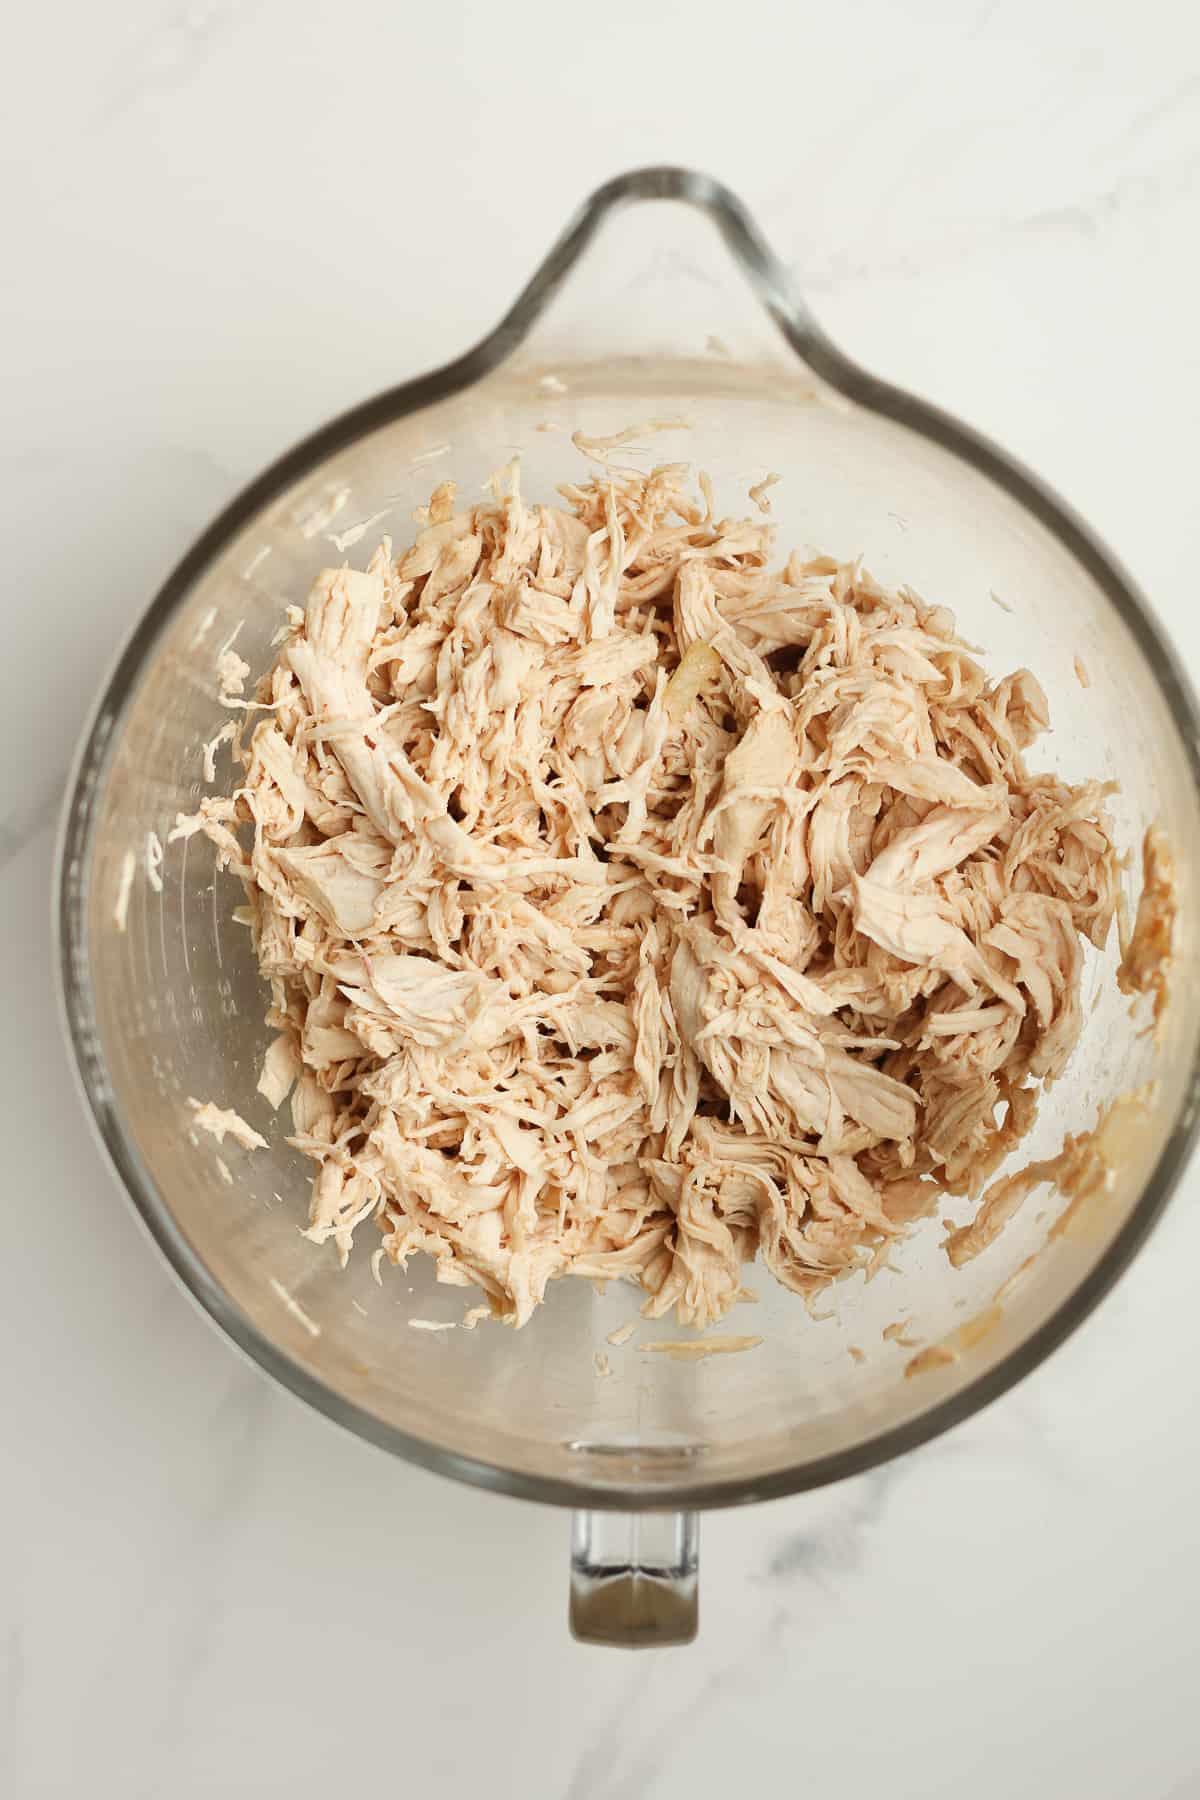 A mixing bowl with shredded chicken.